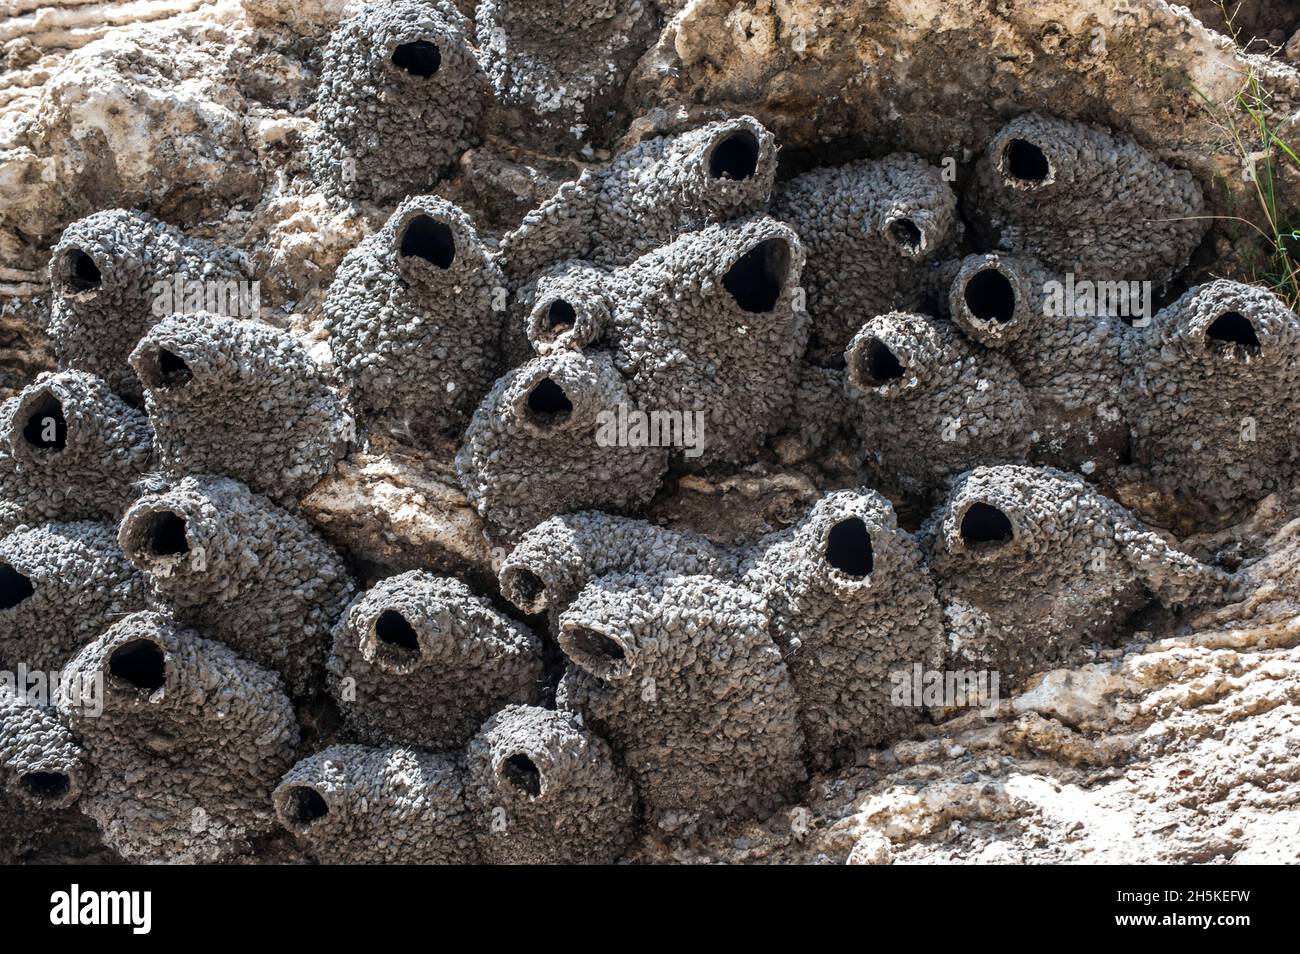 Cliff swallow nests. Stock Photo